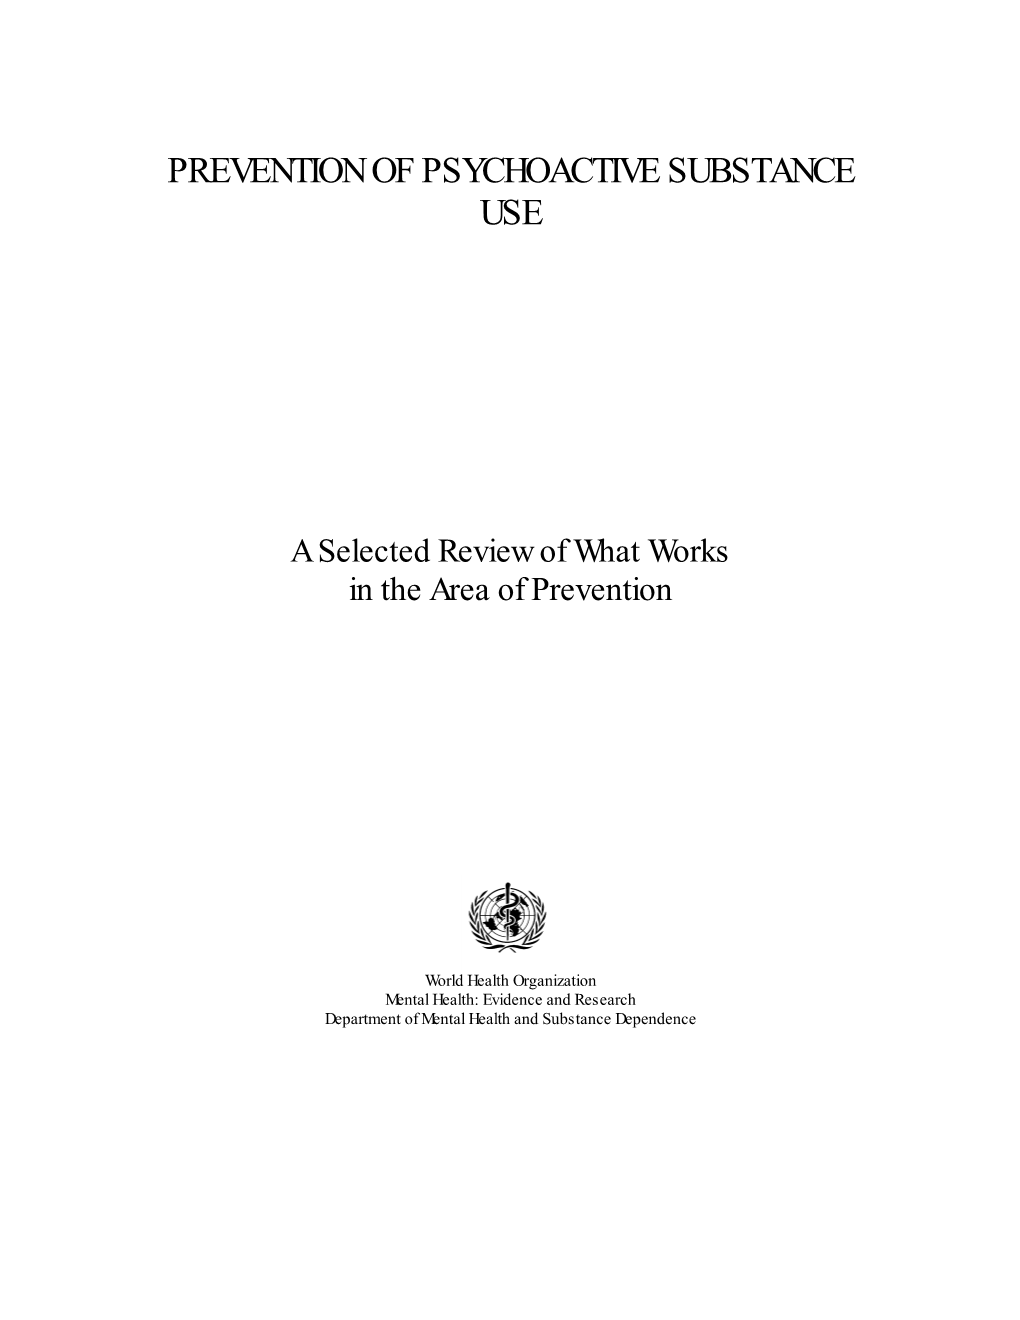 Prevention of Psychoactive Substance Use